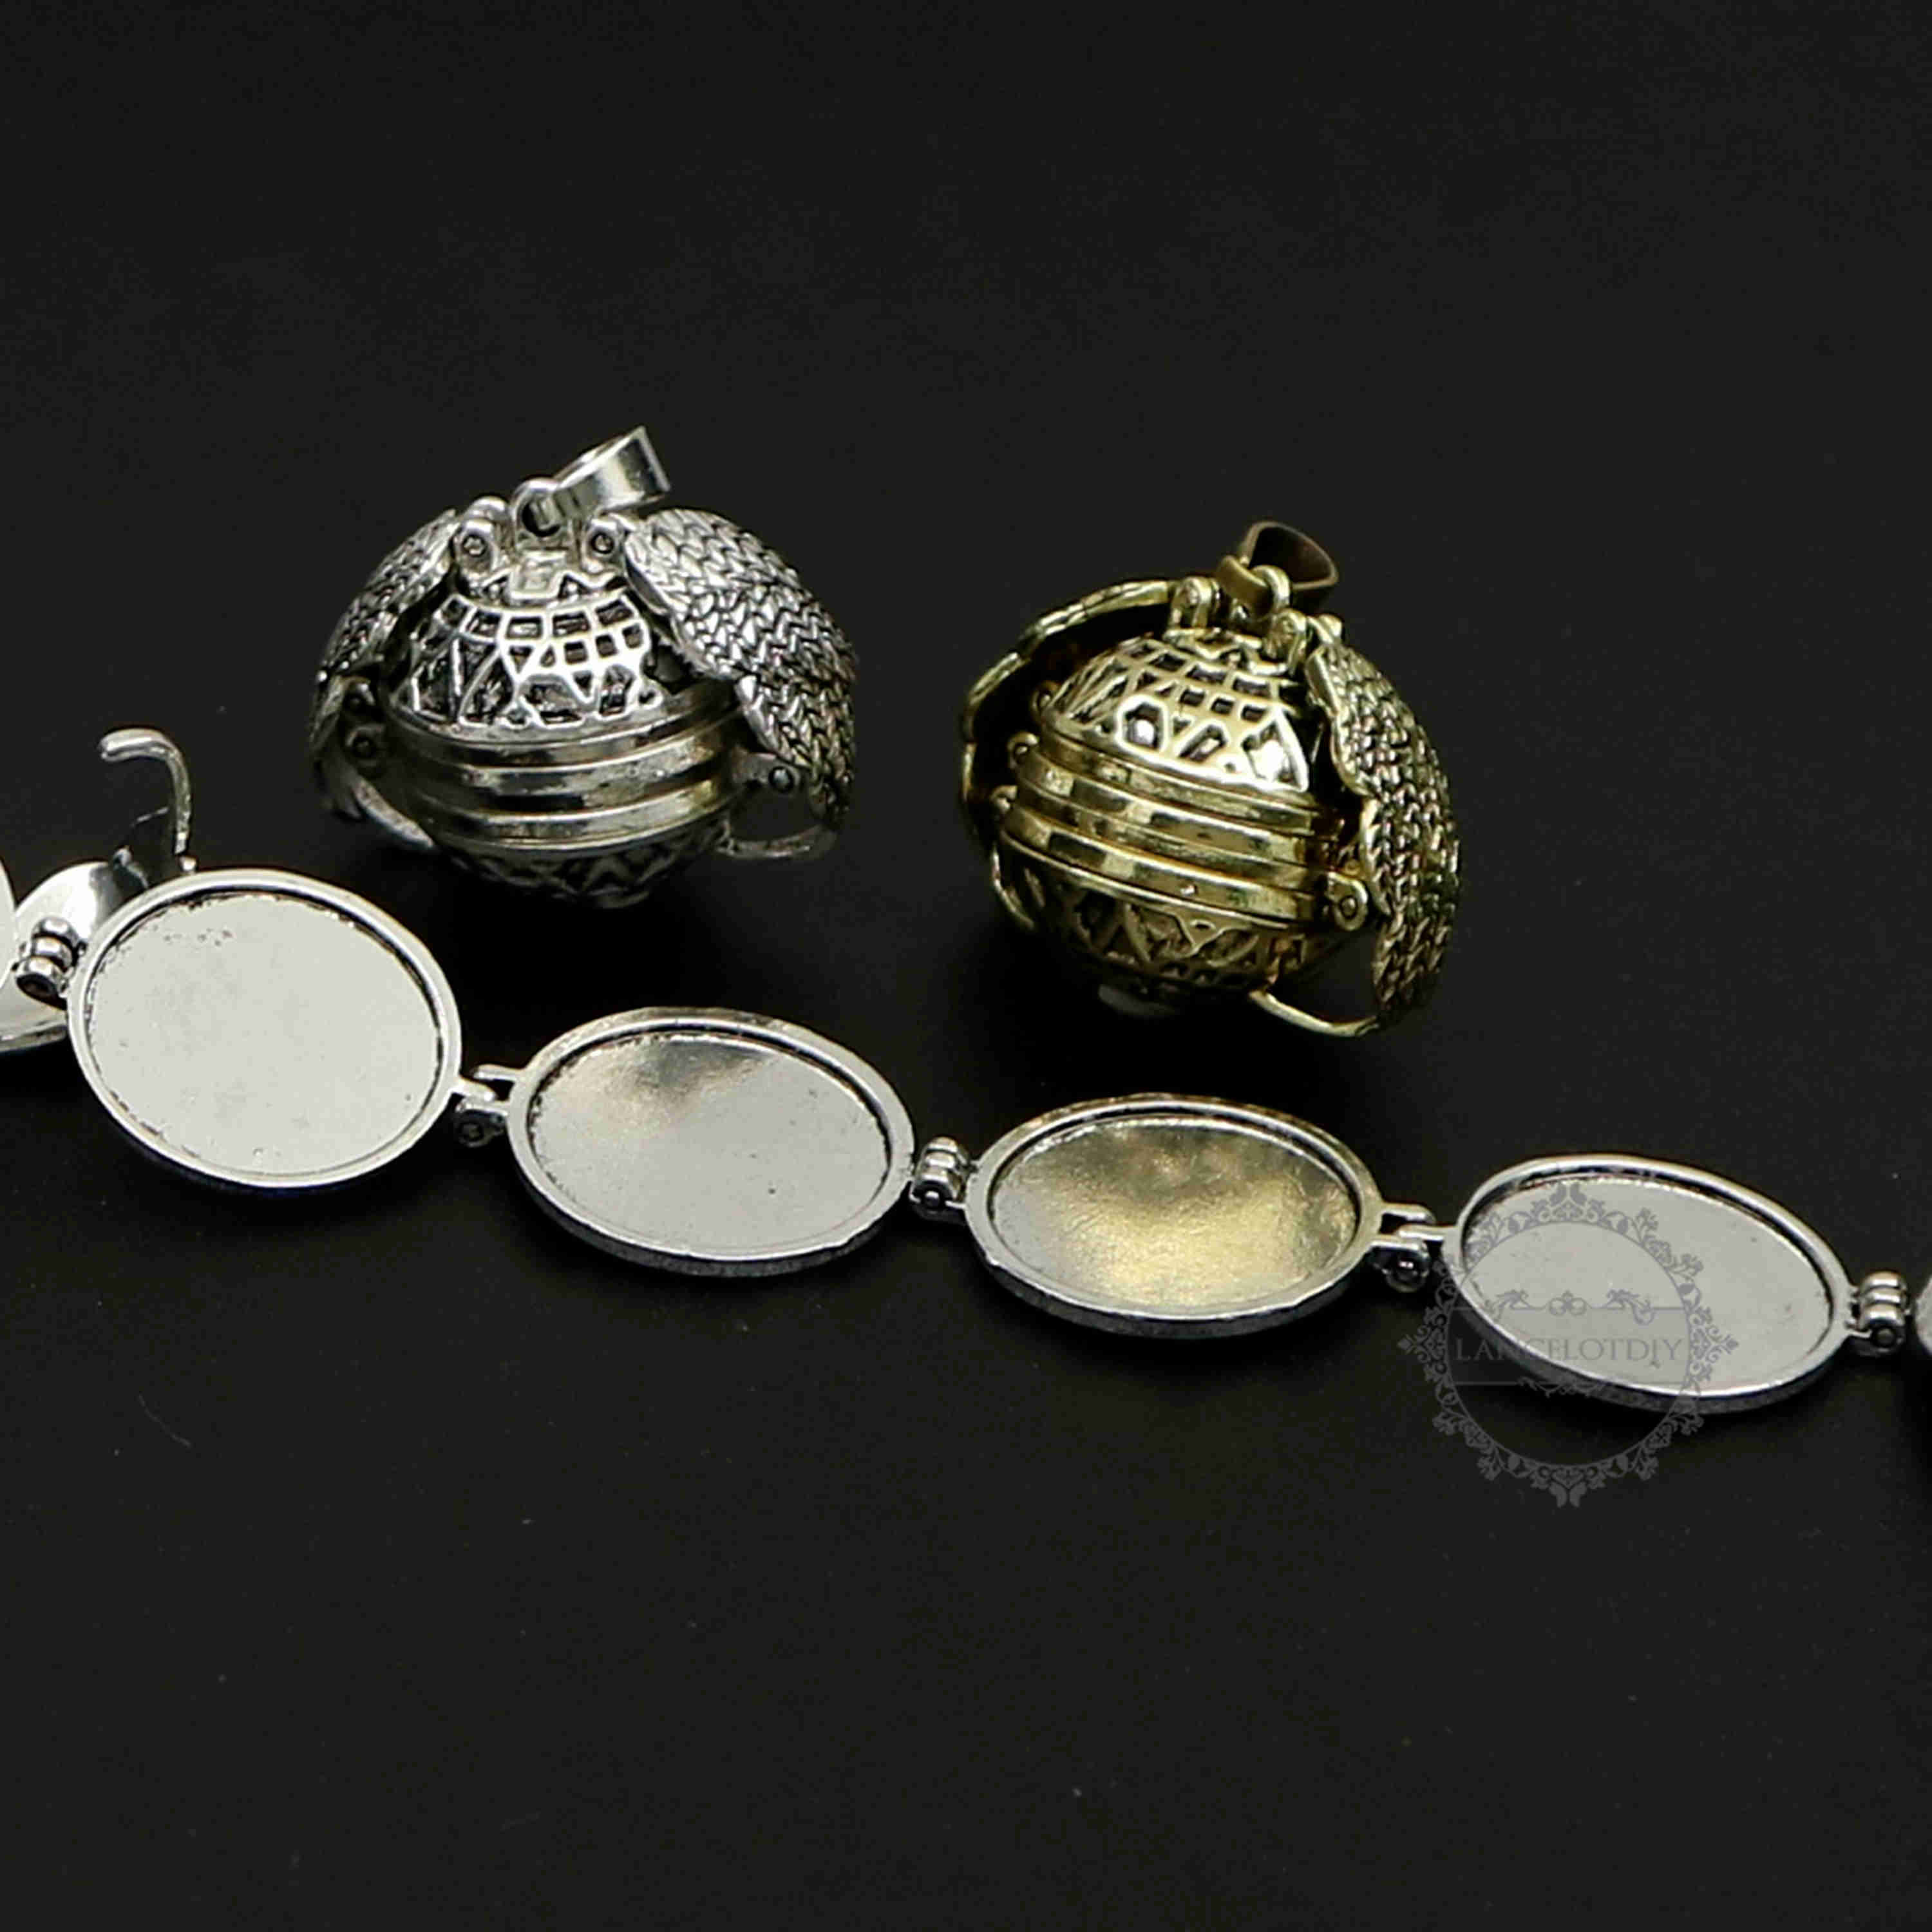 5pcs 25mm vintage style antiqued silver angel wing four fold round ball photo locket pendant charm DIY supplies 1113031 - Click Image to Close